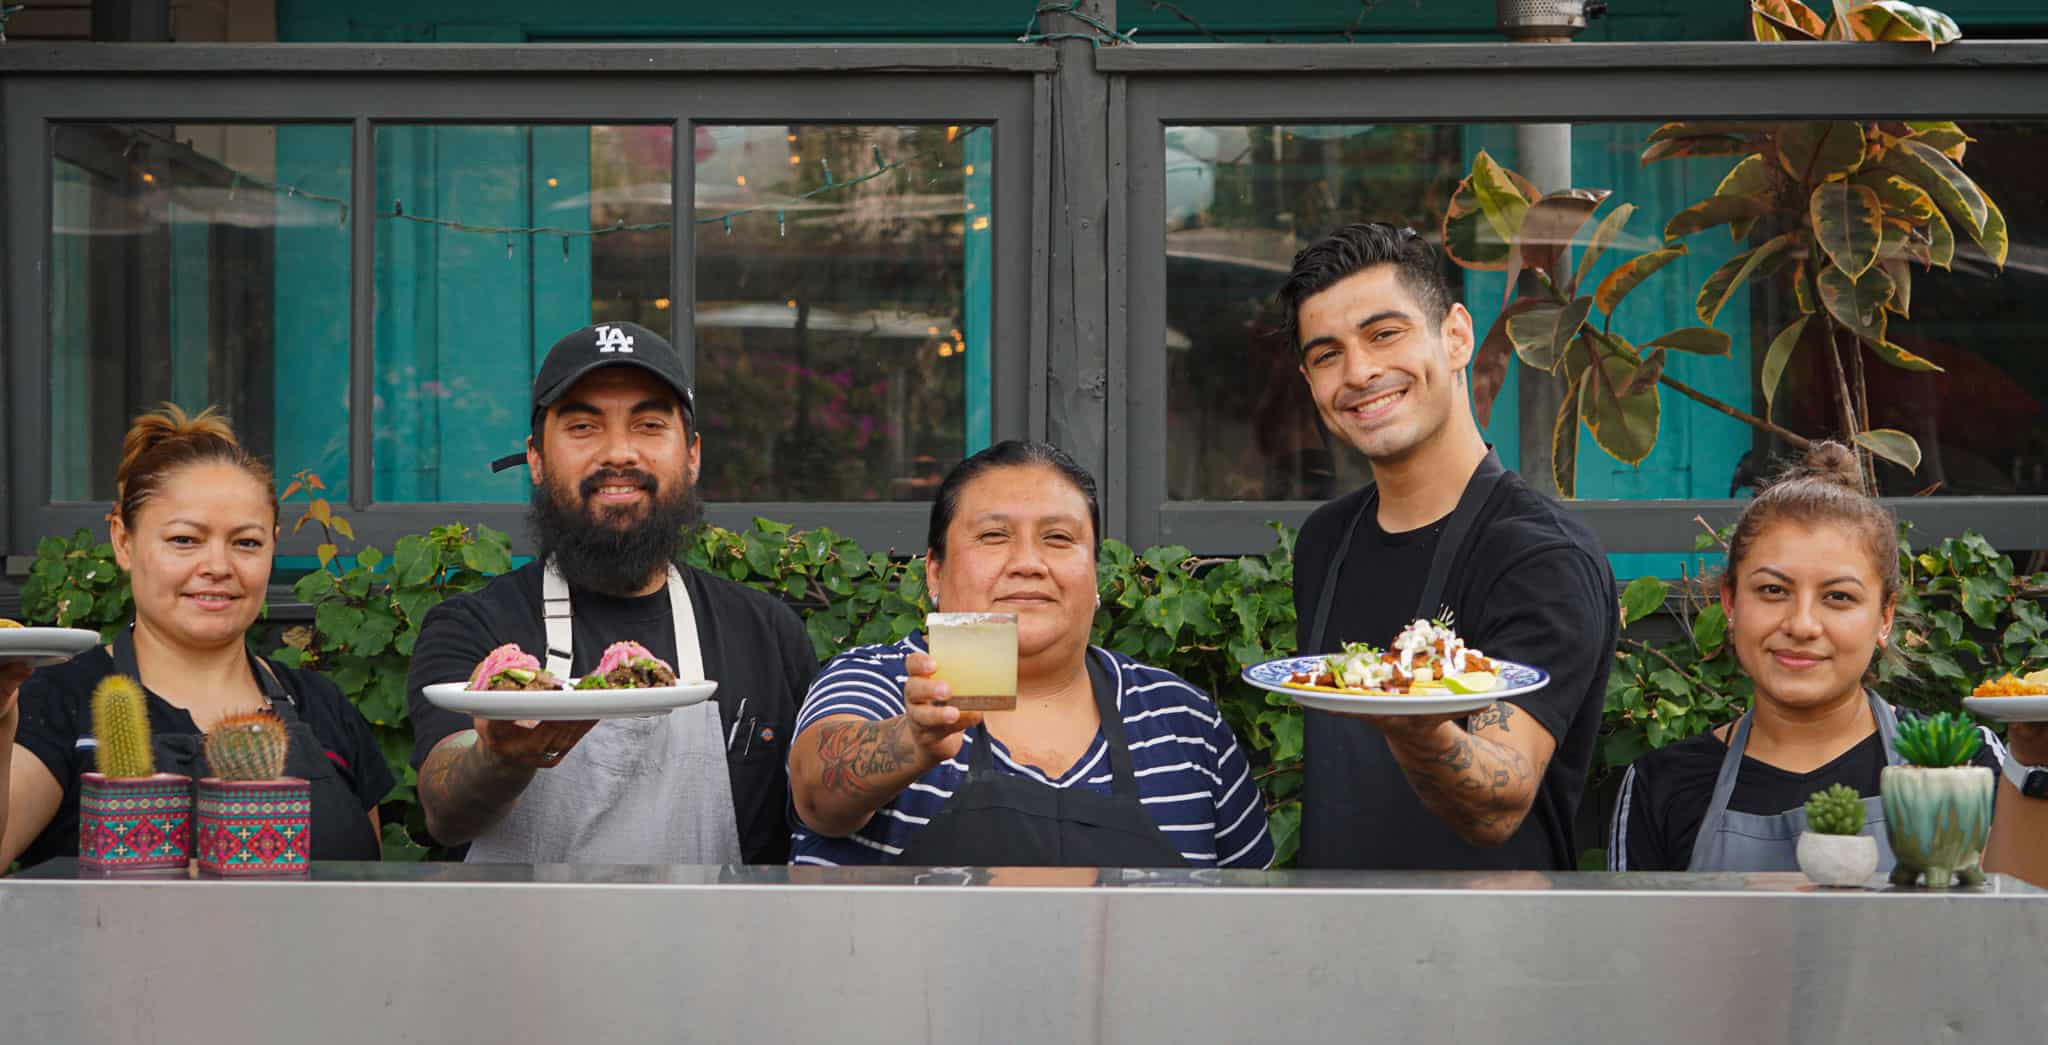 Tallula's Taco Cart with Chefs holding up dishes & drinks